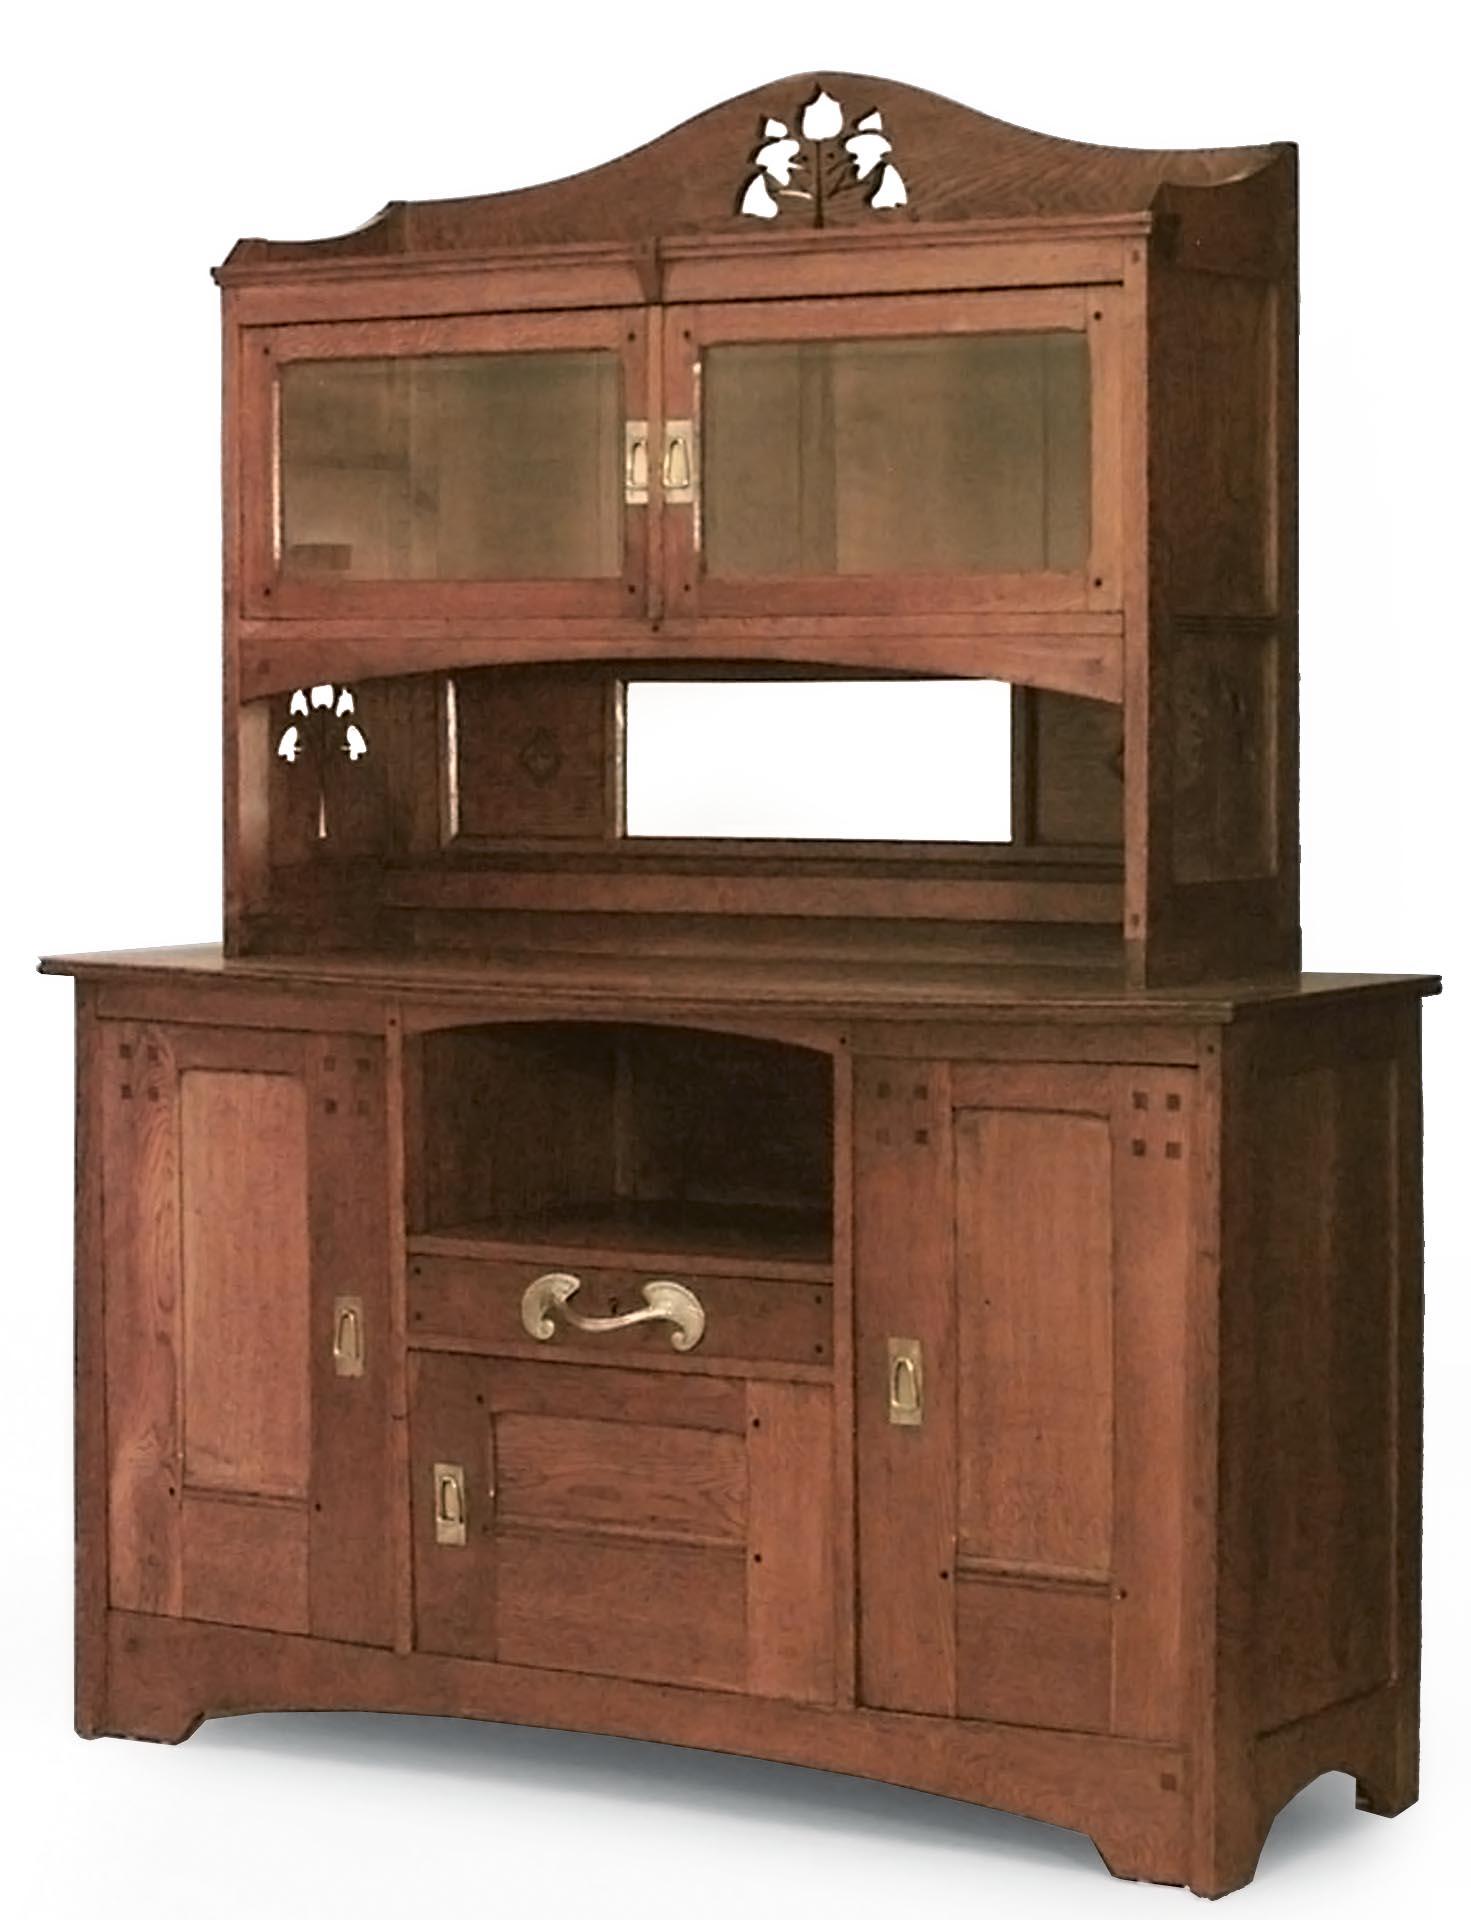 French Arts and Crafts oak cupboard cabinet with stylized bronze handles and floral cut outs on sides and pediment (Attributed to: Leon Jallot)
